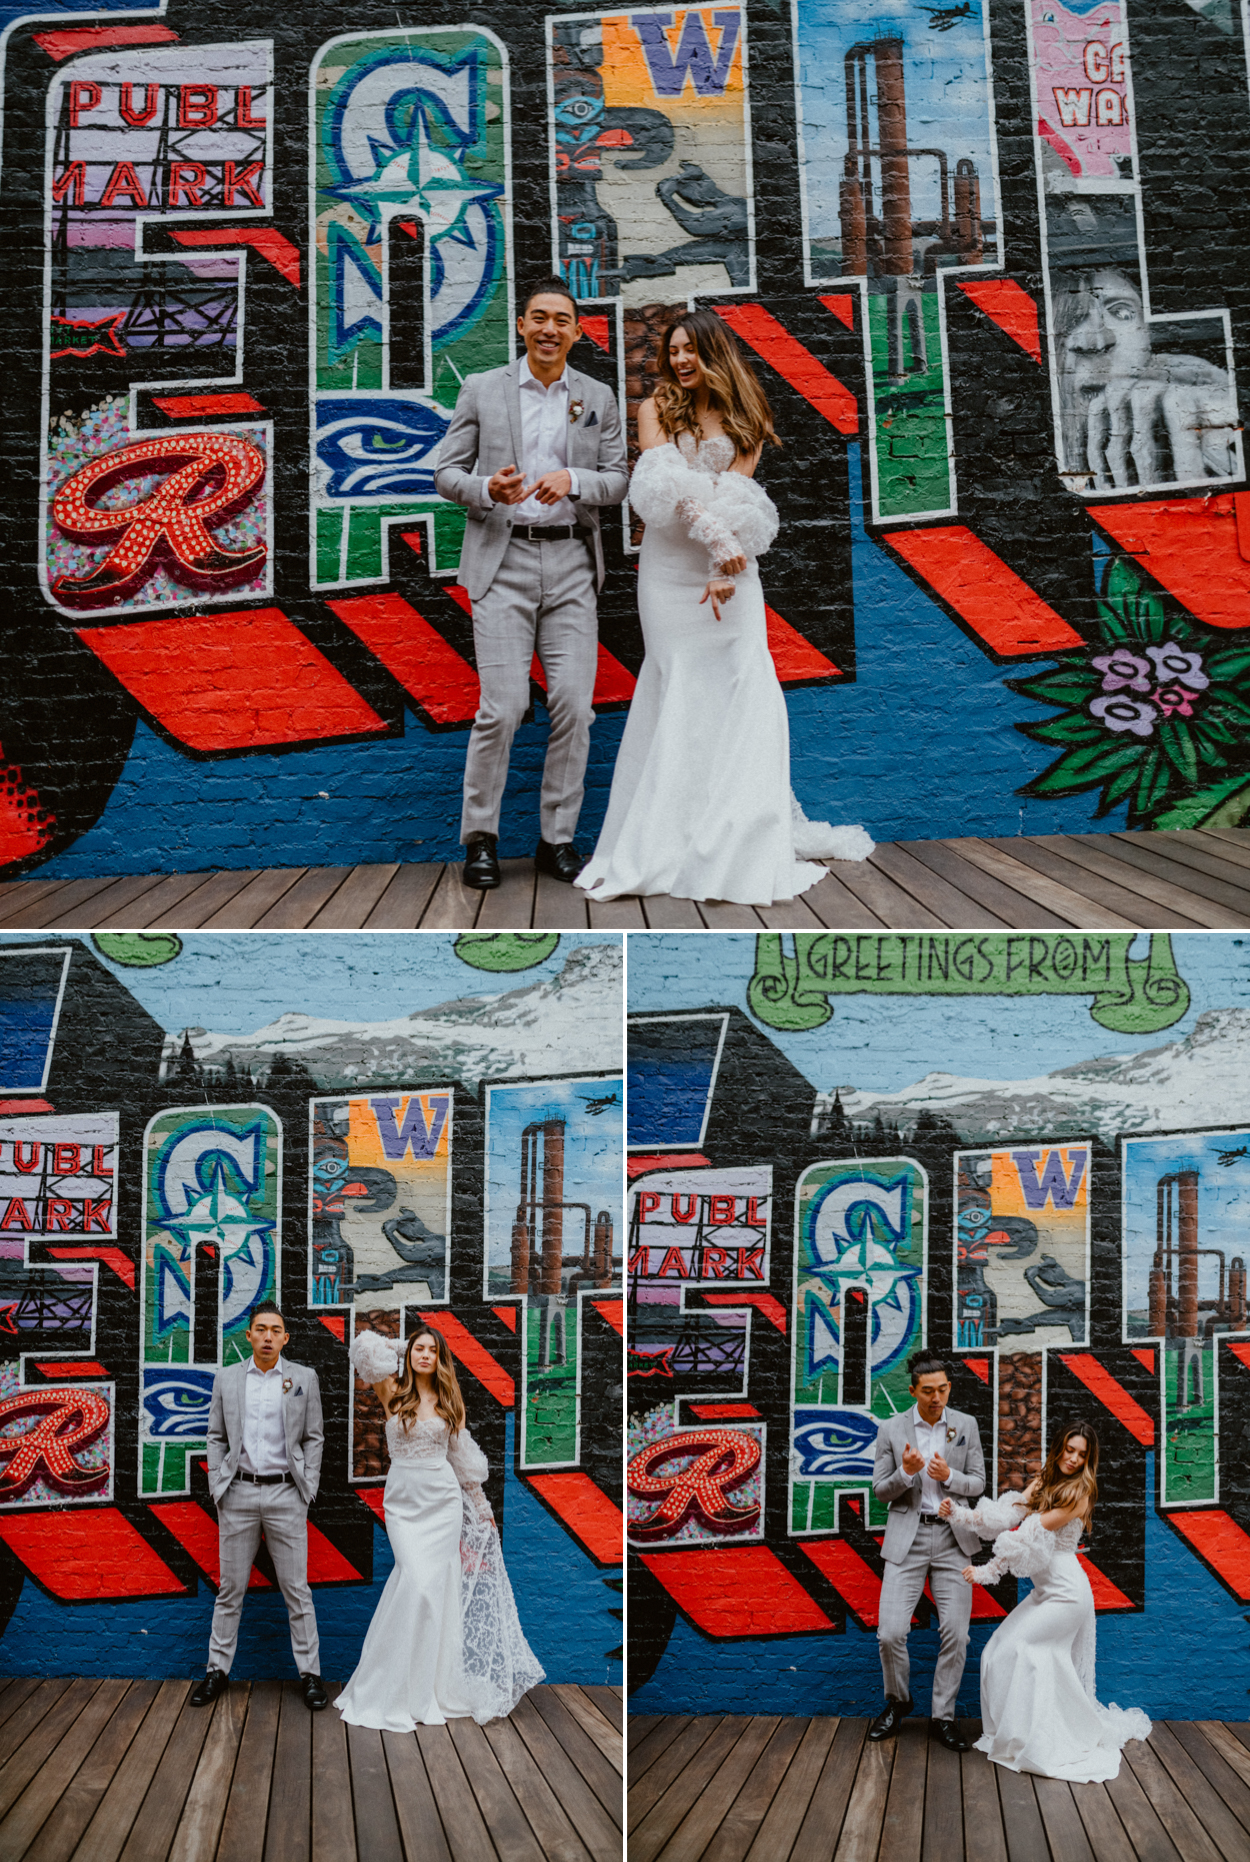 Bride and groom photos in front of wall with graffiti